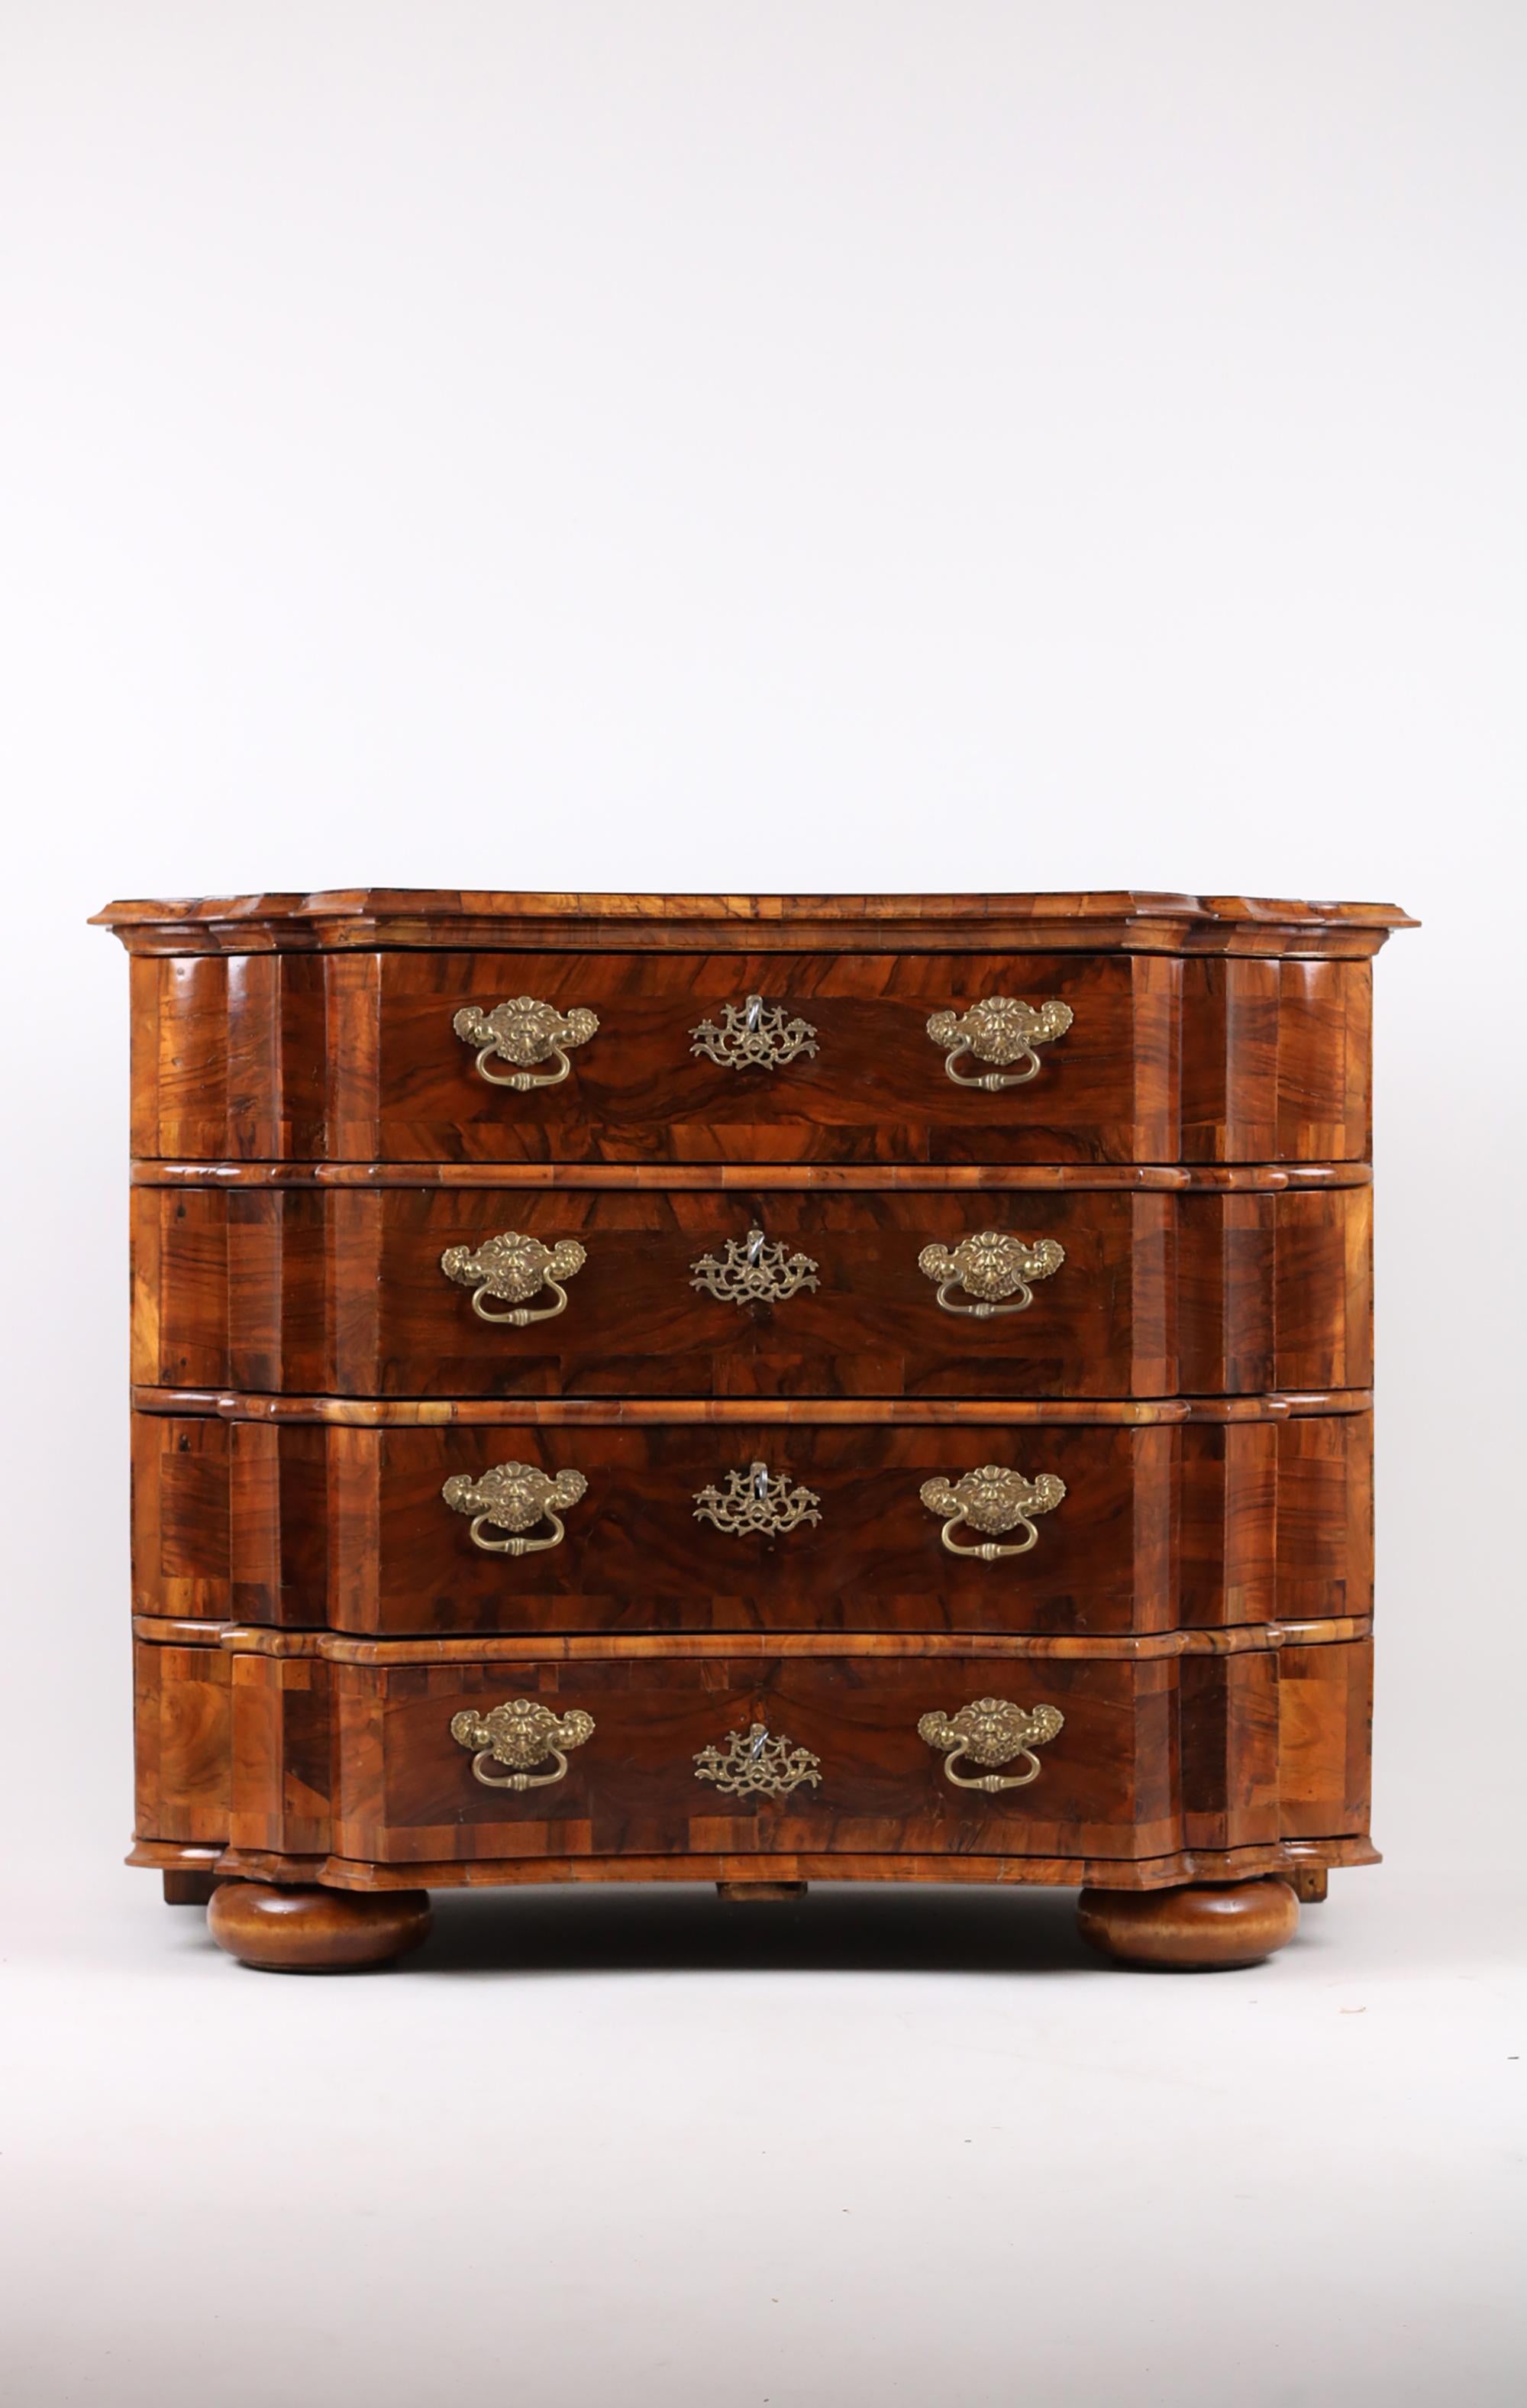 18th Century Chest of Drawers,
Germany, 1760-1780

Rare original chest of drawers from the 2nd half of the 18th century, strongly curved top plate, with cross joint, double curved drawers, with original fittings, box locks, 4 keys, strongly wavy